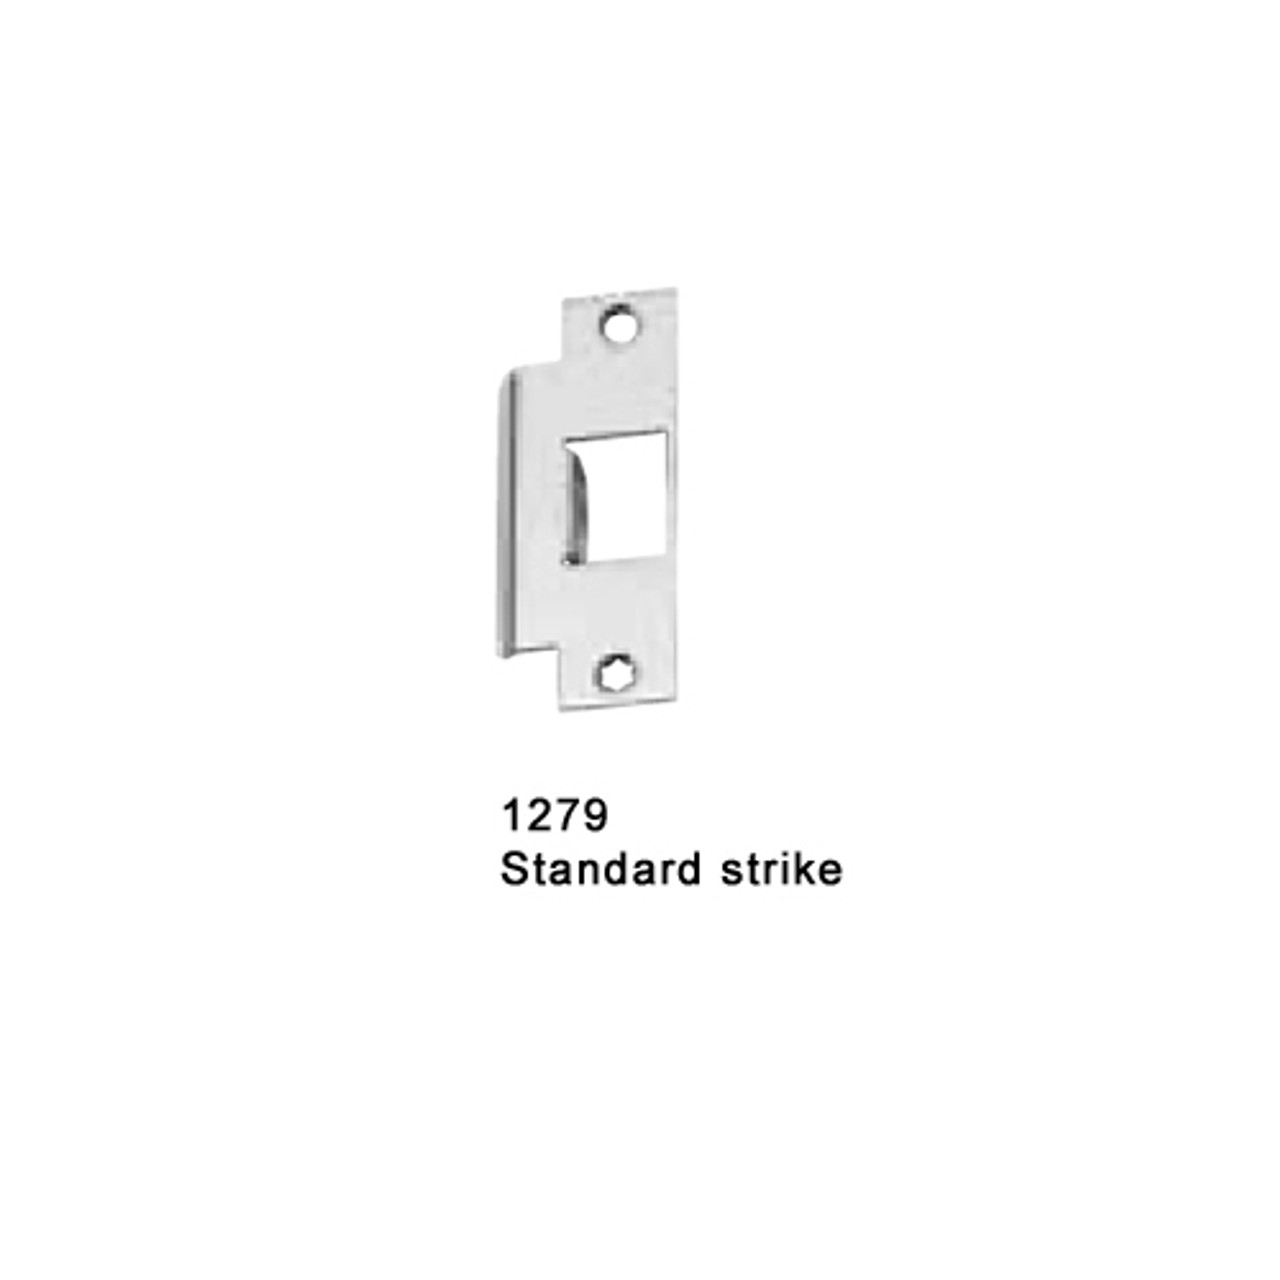 F-25-M-L-NL-Dane-US28-3-LHR Falcon 25 Series Fire Rated Mortise Lock Devices 510L-NL Dane Lever Trim with Night Latch in Anodized Aluminum